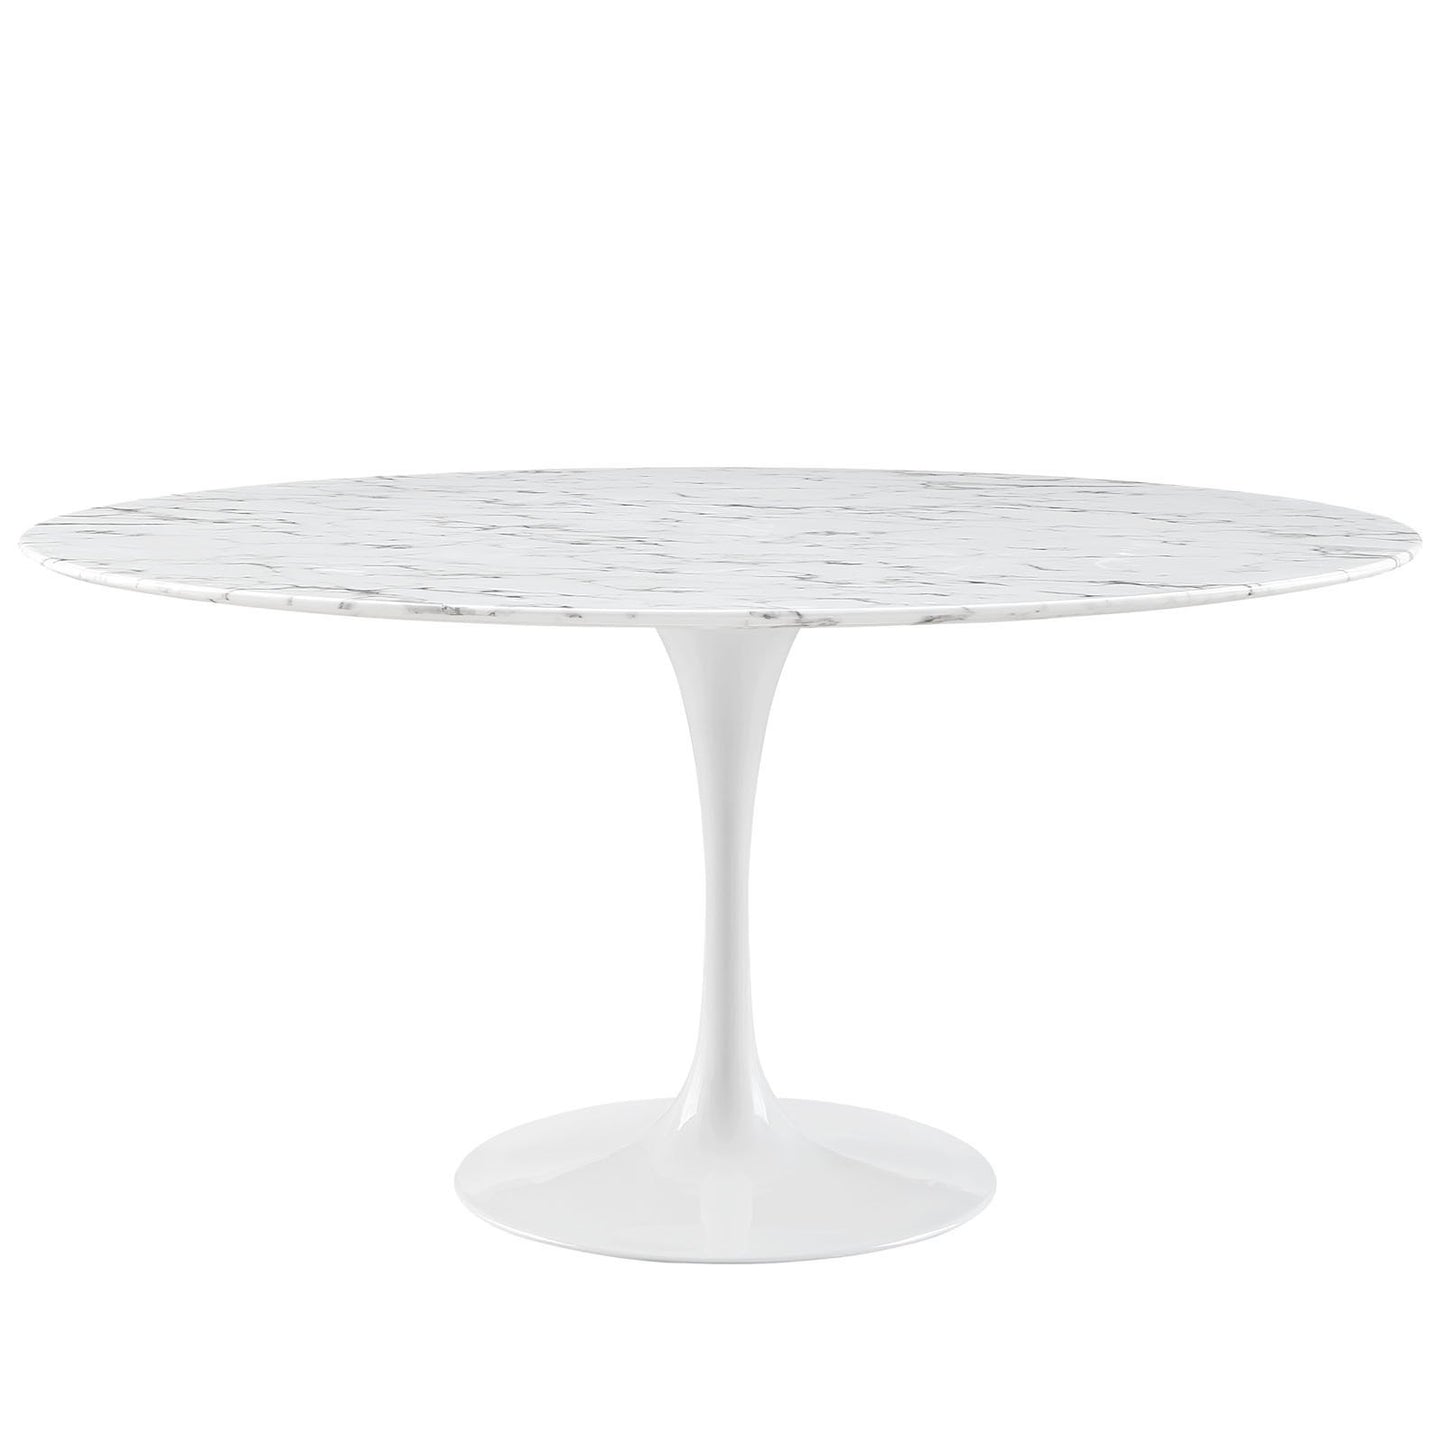 Tulip Style 60" Marble Dining Table - living-essentials